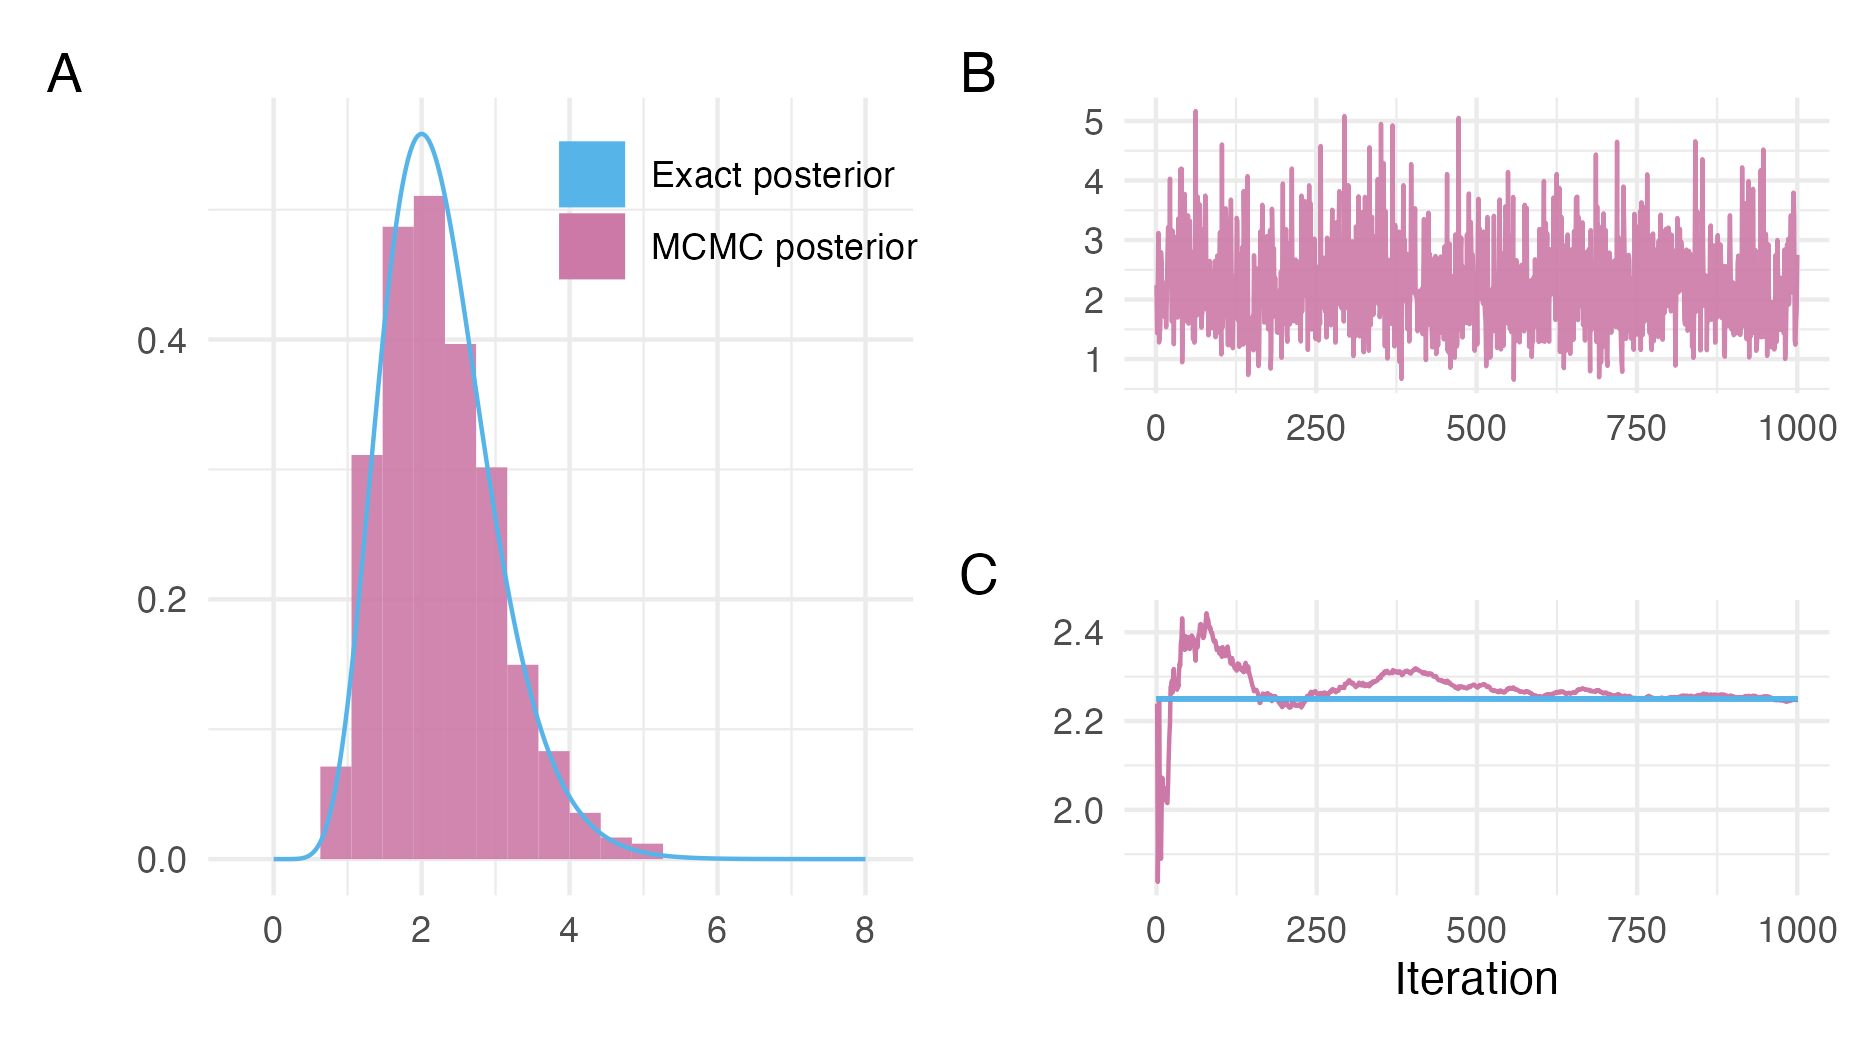 NUTS can be used to sample from the posterior distribution described in Figure 3.1. Panel A shows a histogram of the NUTS samples as compared to the true posterior. The visual appearance of a histogram depends highly on the number of bins chosen, though it does not depend on tuning parameters like kernel density estimation. Other visualisations, such as empirical cumulative difference function plots, though less initially intuitive, are preferred for accurate distributional sample comparisons. Panel B is a traceplot showing the path of the Markov chain \(\{\phi_s\}_{s = 1}^{1000}\) as it explores the posterior distribution. In this case, the Markov chain moves freely throughout the posterior distribution, without getting stuck in any one location for long, indicating good performance of the sampler. Panel C shows convergence of the empirical posterior mean \(\frac{1}{s} \sum_{l \leq s} \phi_l\) to the true value of \(\mathbb{E}(\phi)\) as more iterations of the Markov chain are included in the sum. In this case, the samples from NUTS are highly accurate in estimating this posterior expectation.